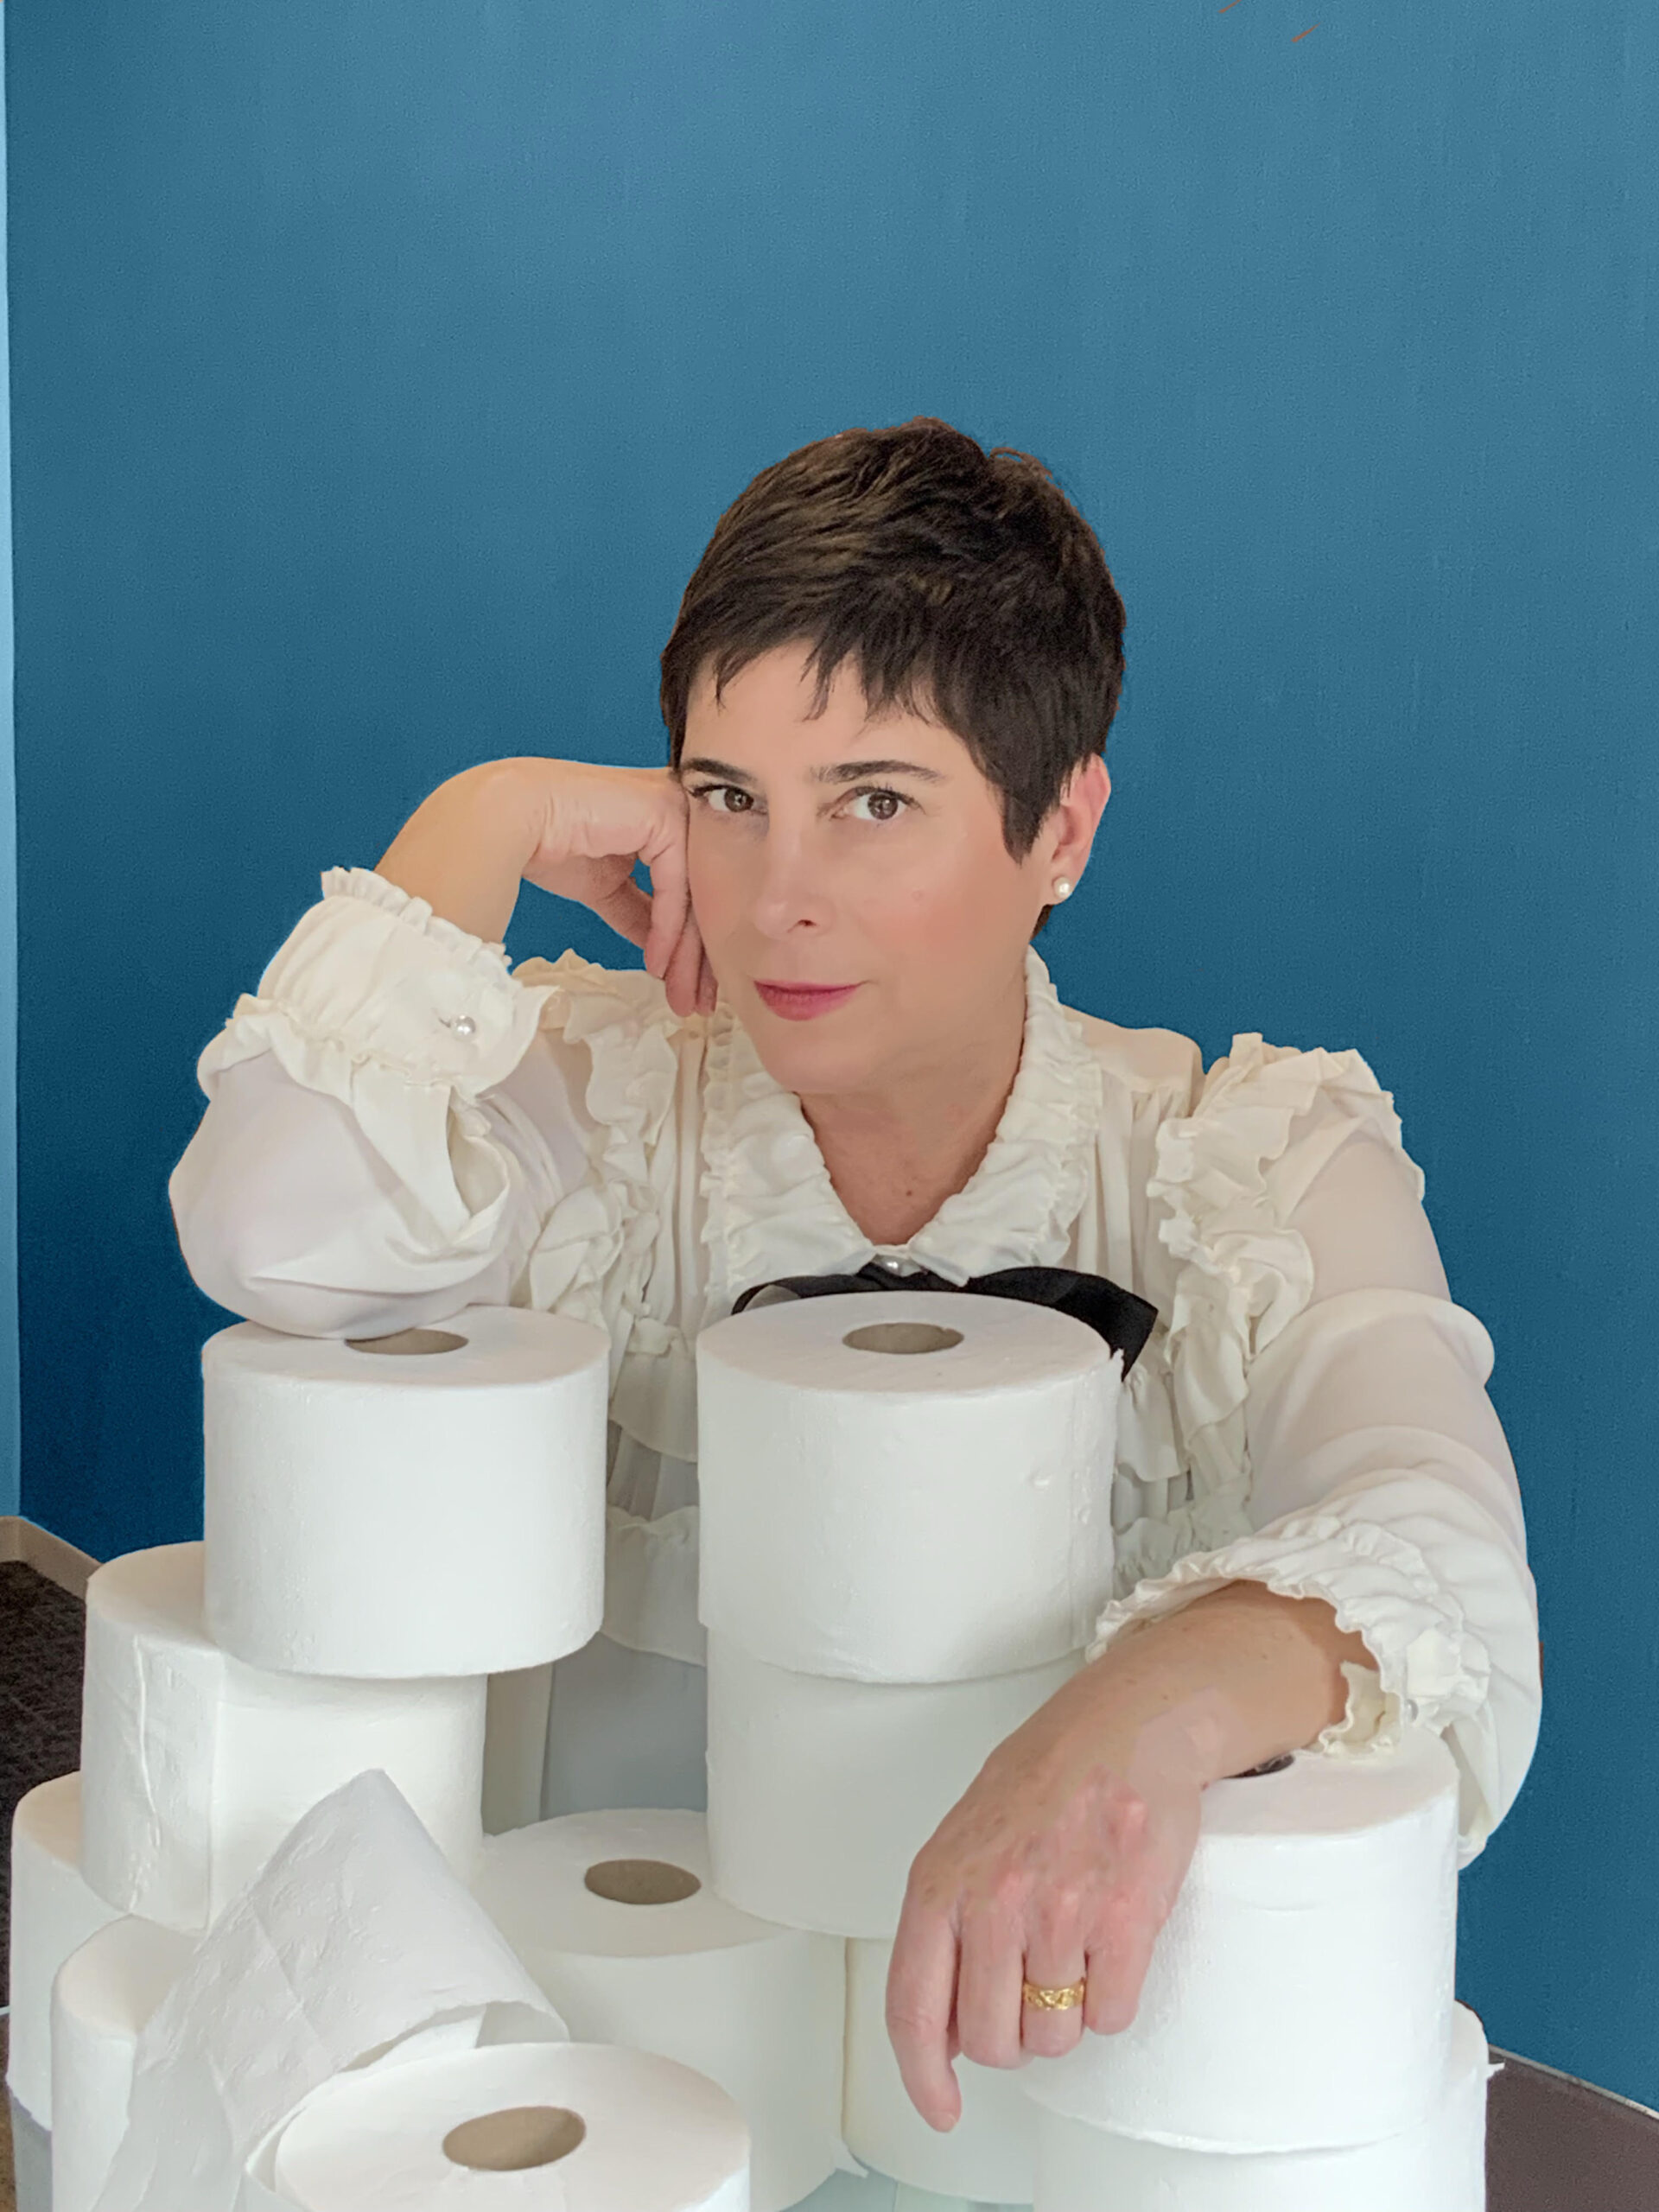 Amy is a smiling white woman with short black hair, wearing a white ruffled blouse. She is seated before a blue wall behind several stacks of toilet paper that she is leaning on.